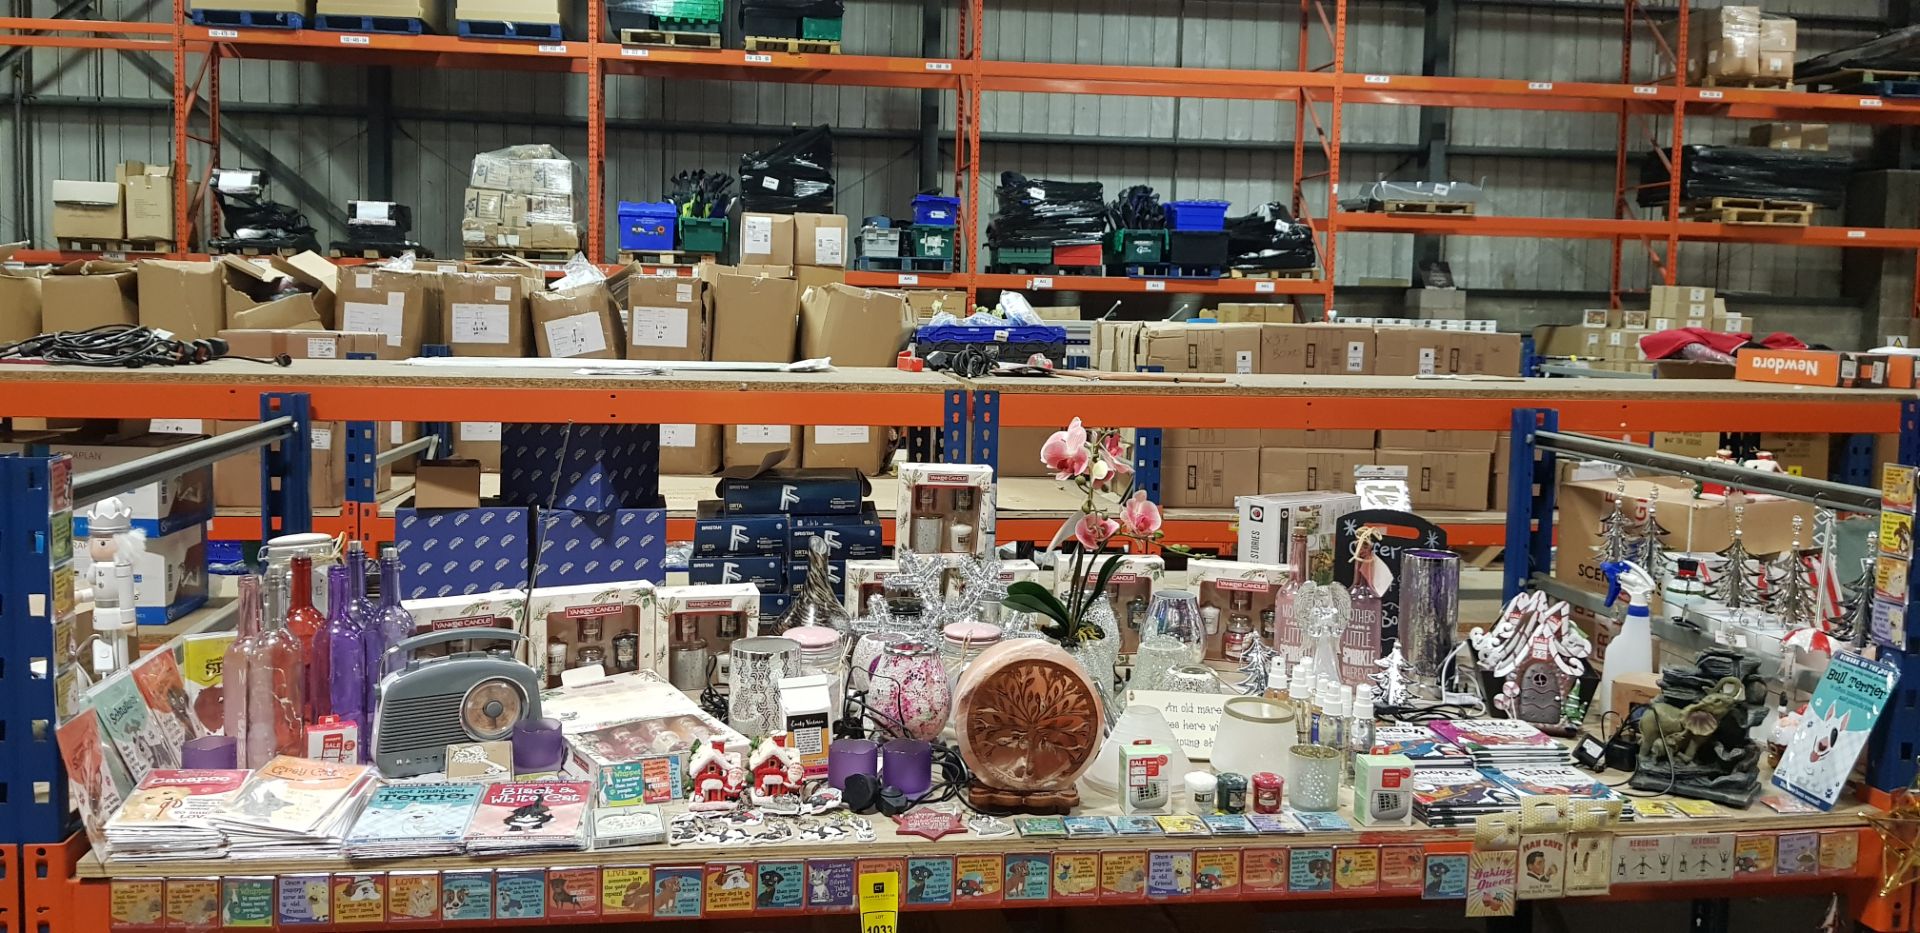 FULL BAY CONTAINING FRIDGE MAGNETS, SALT LAMP, YANKEE CANDLE ACCESSORIES, WATER FLOWER, GLASSES,